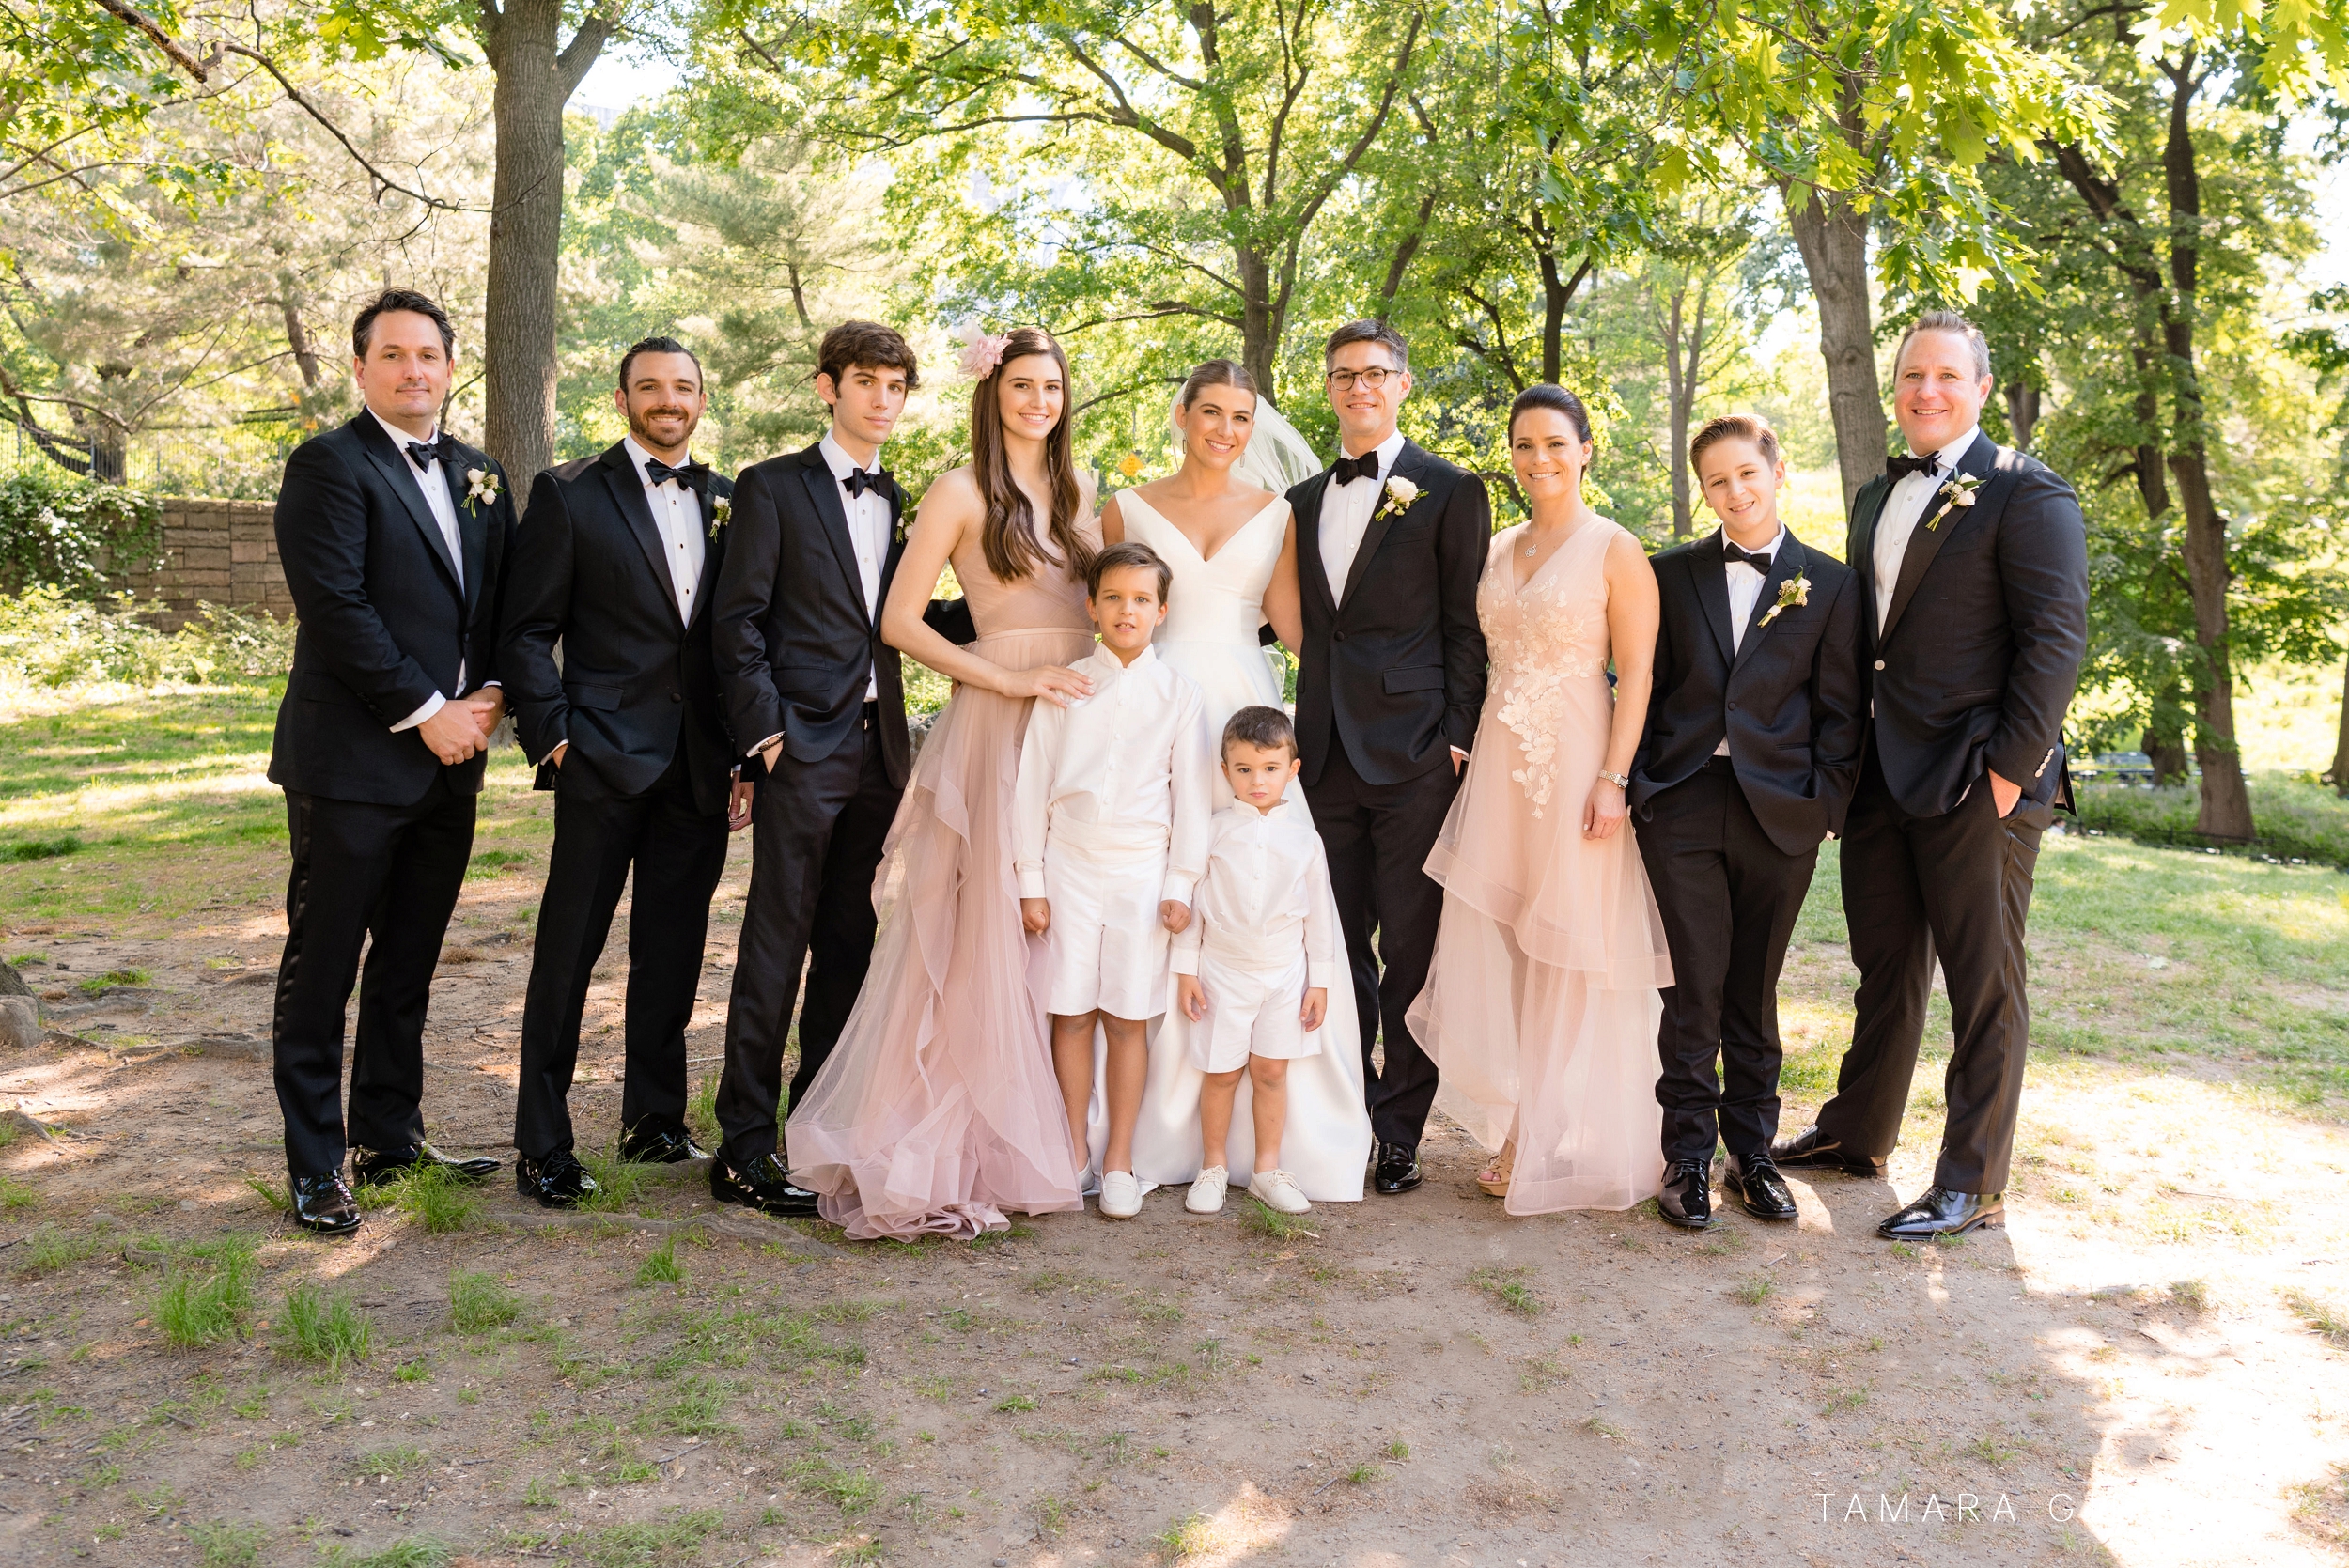 Bridal party under trees